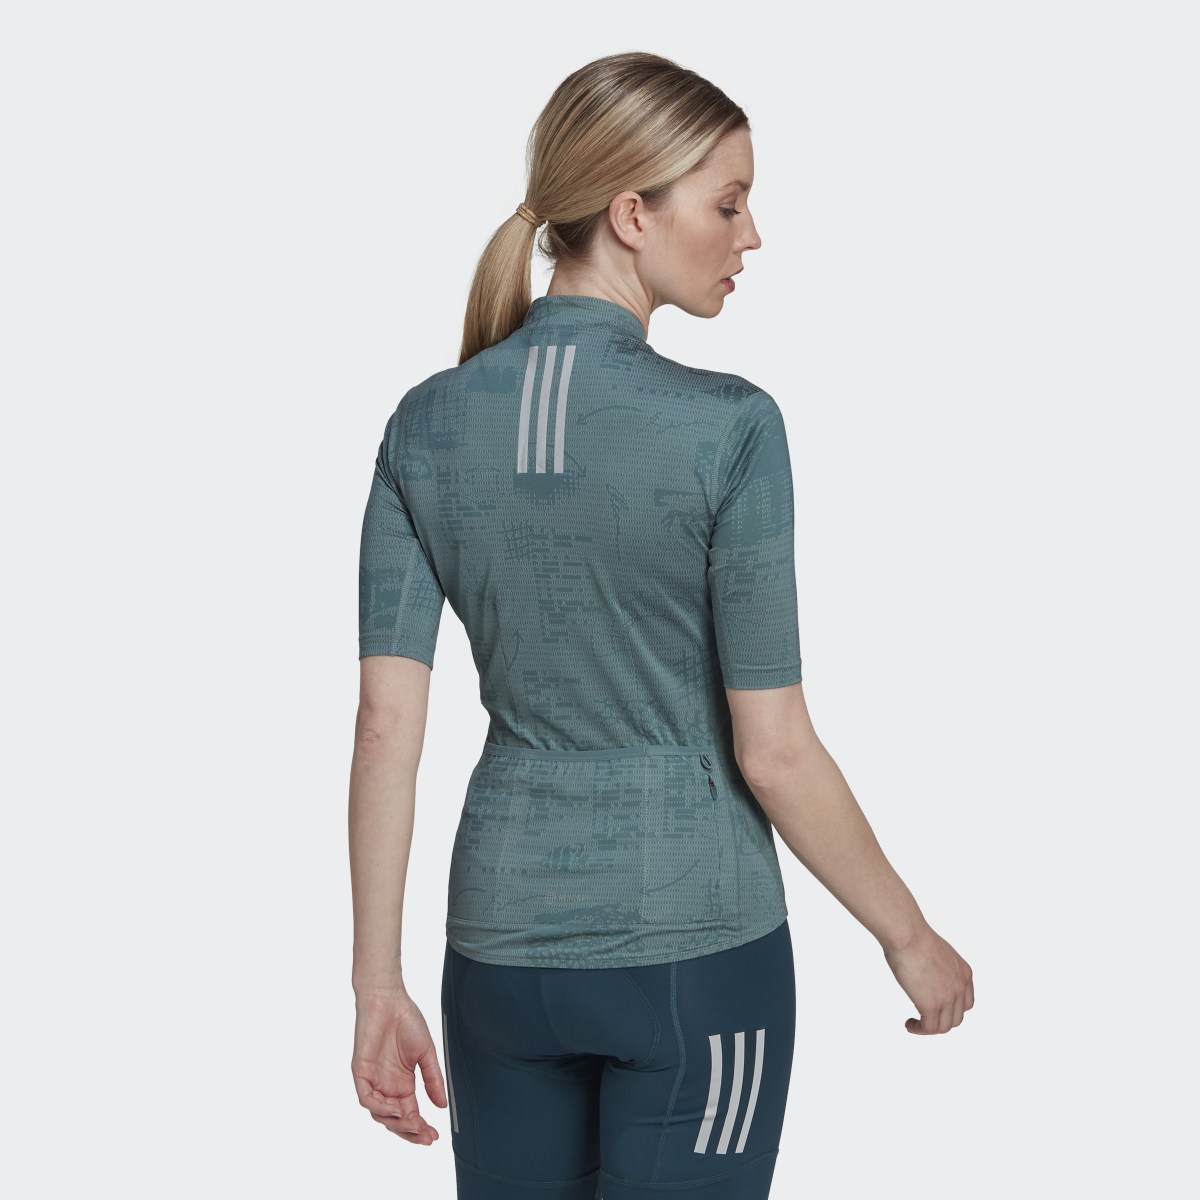 Adidas The Parley Short Sleeve Cycling Jersey. 4